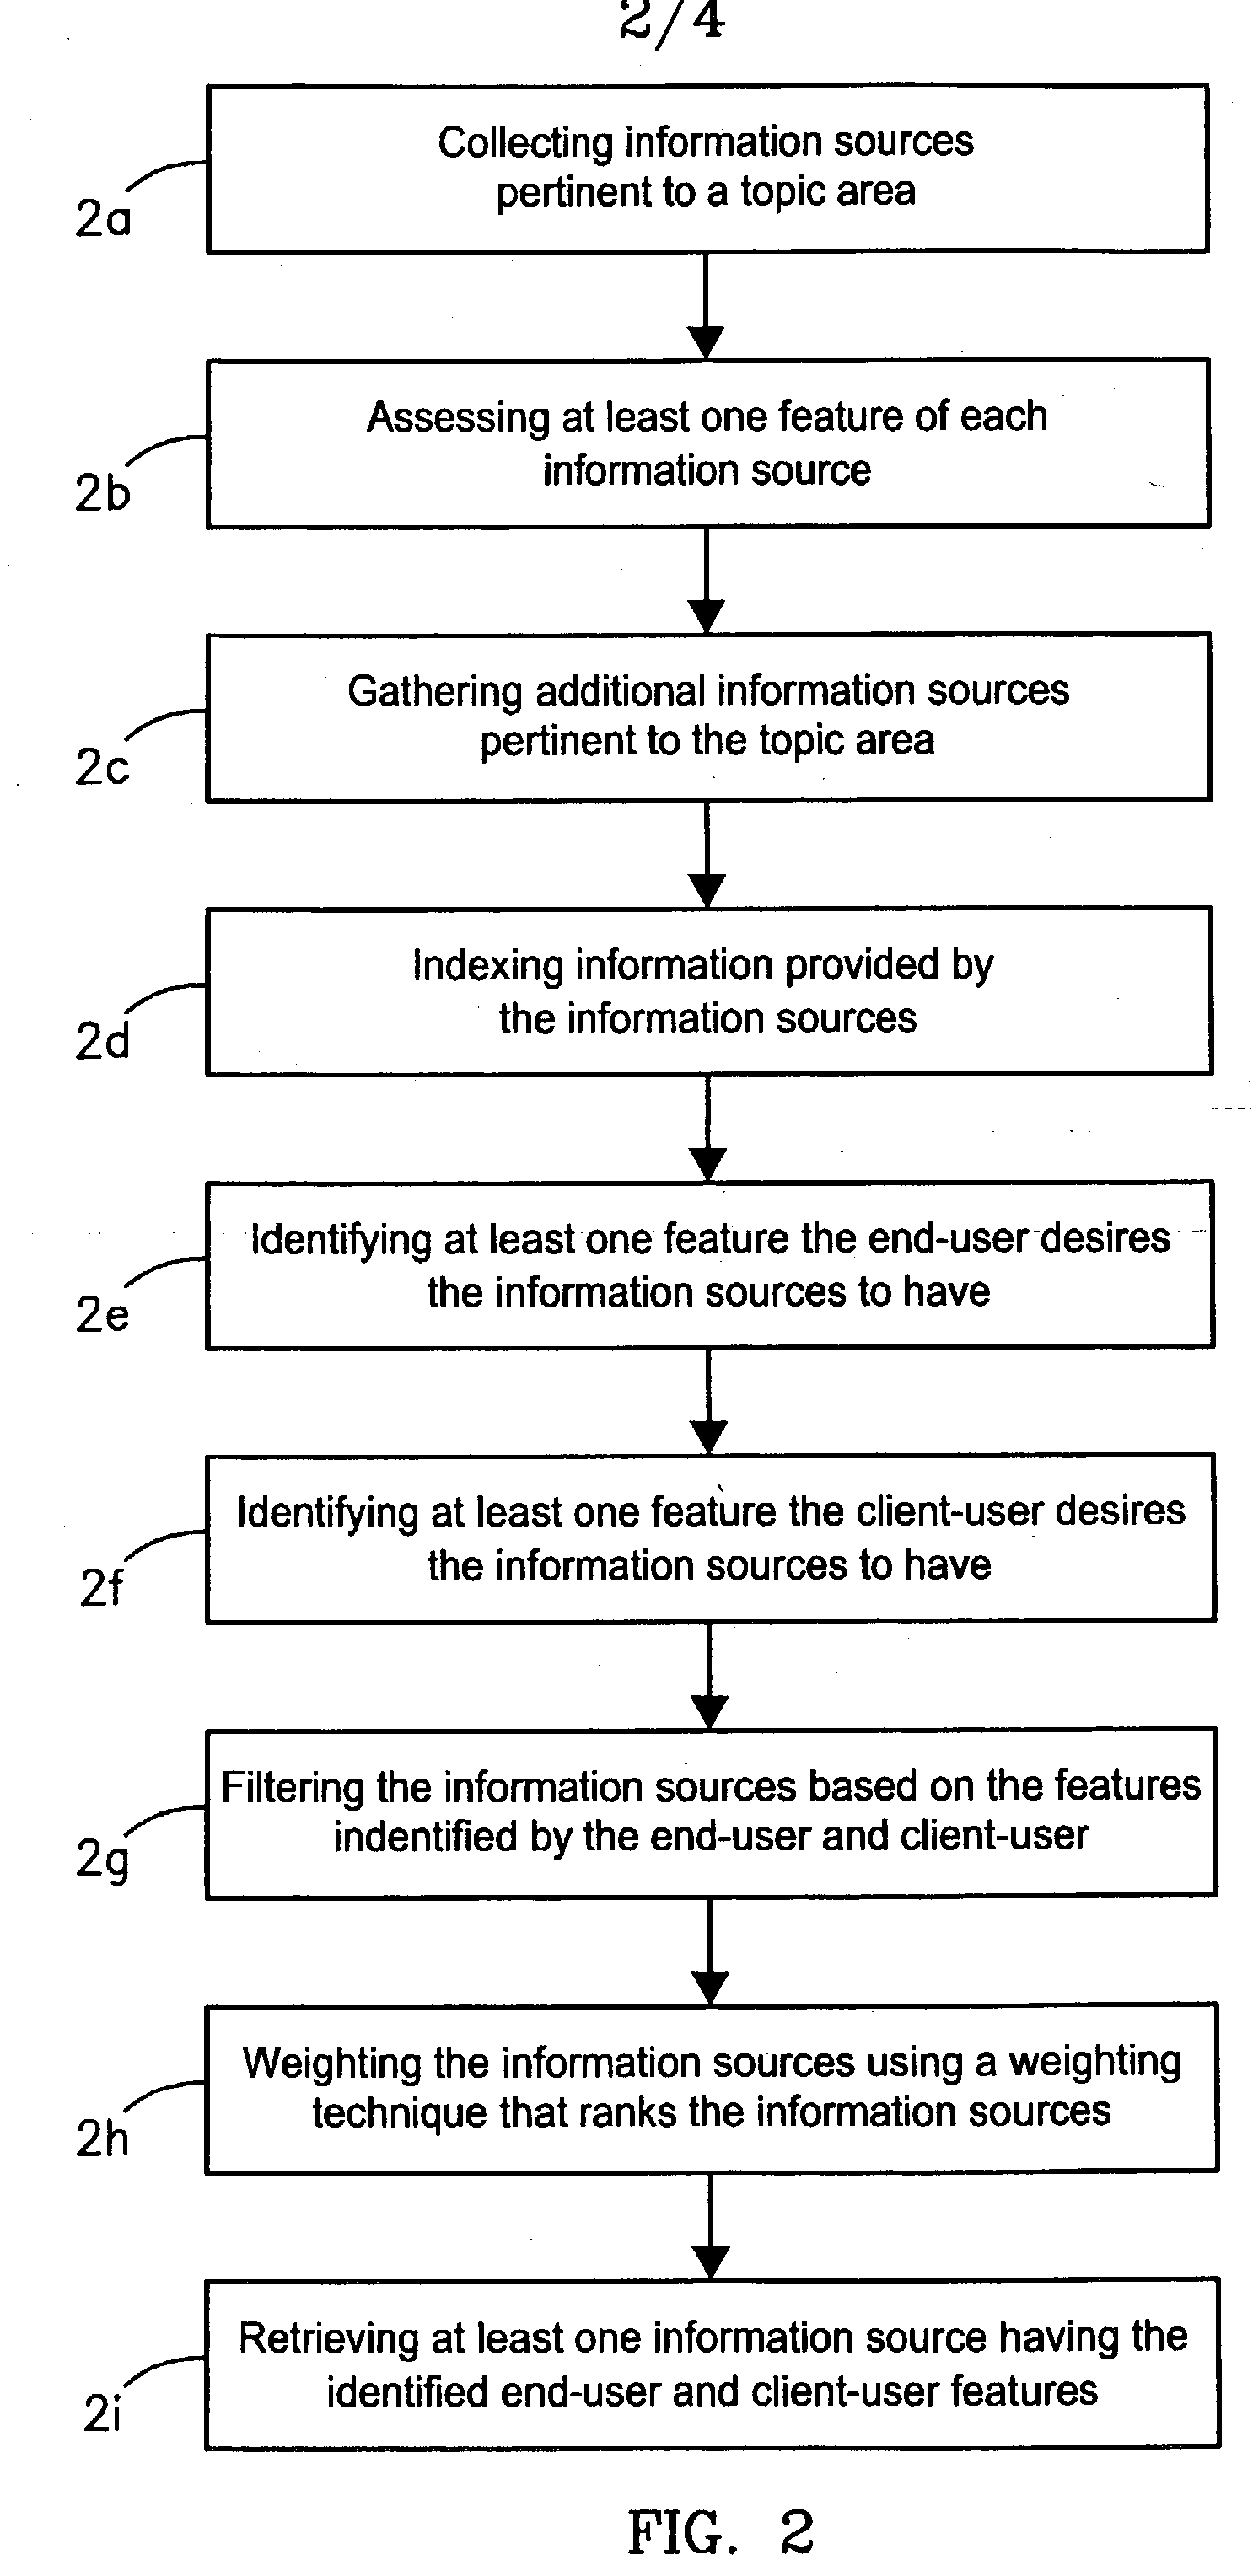 Method and computer program for collecting, rating, and making available electronic information